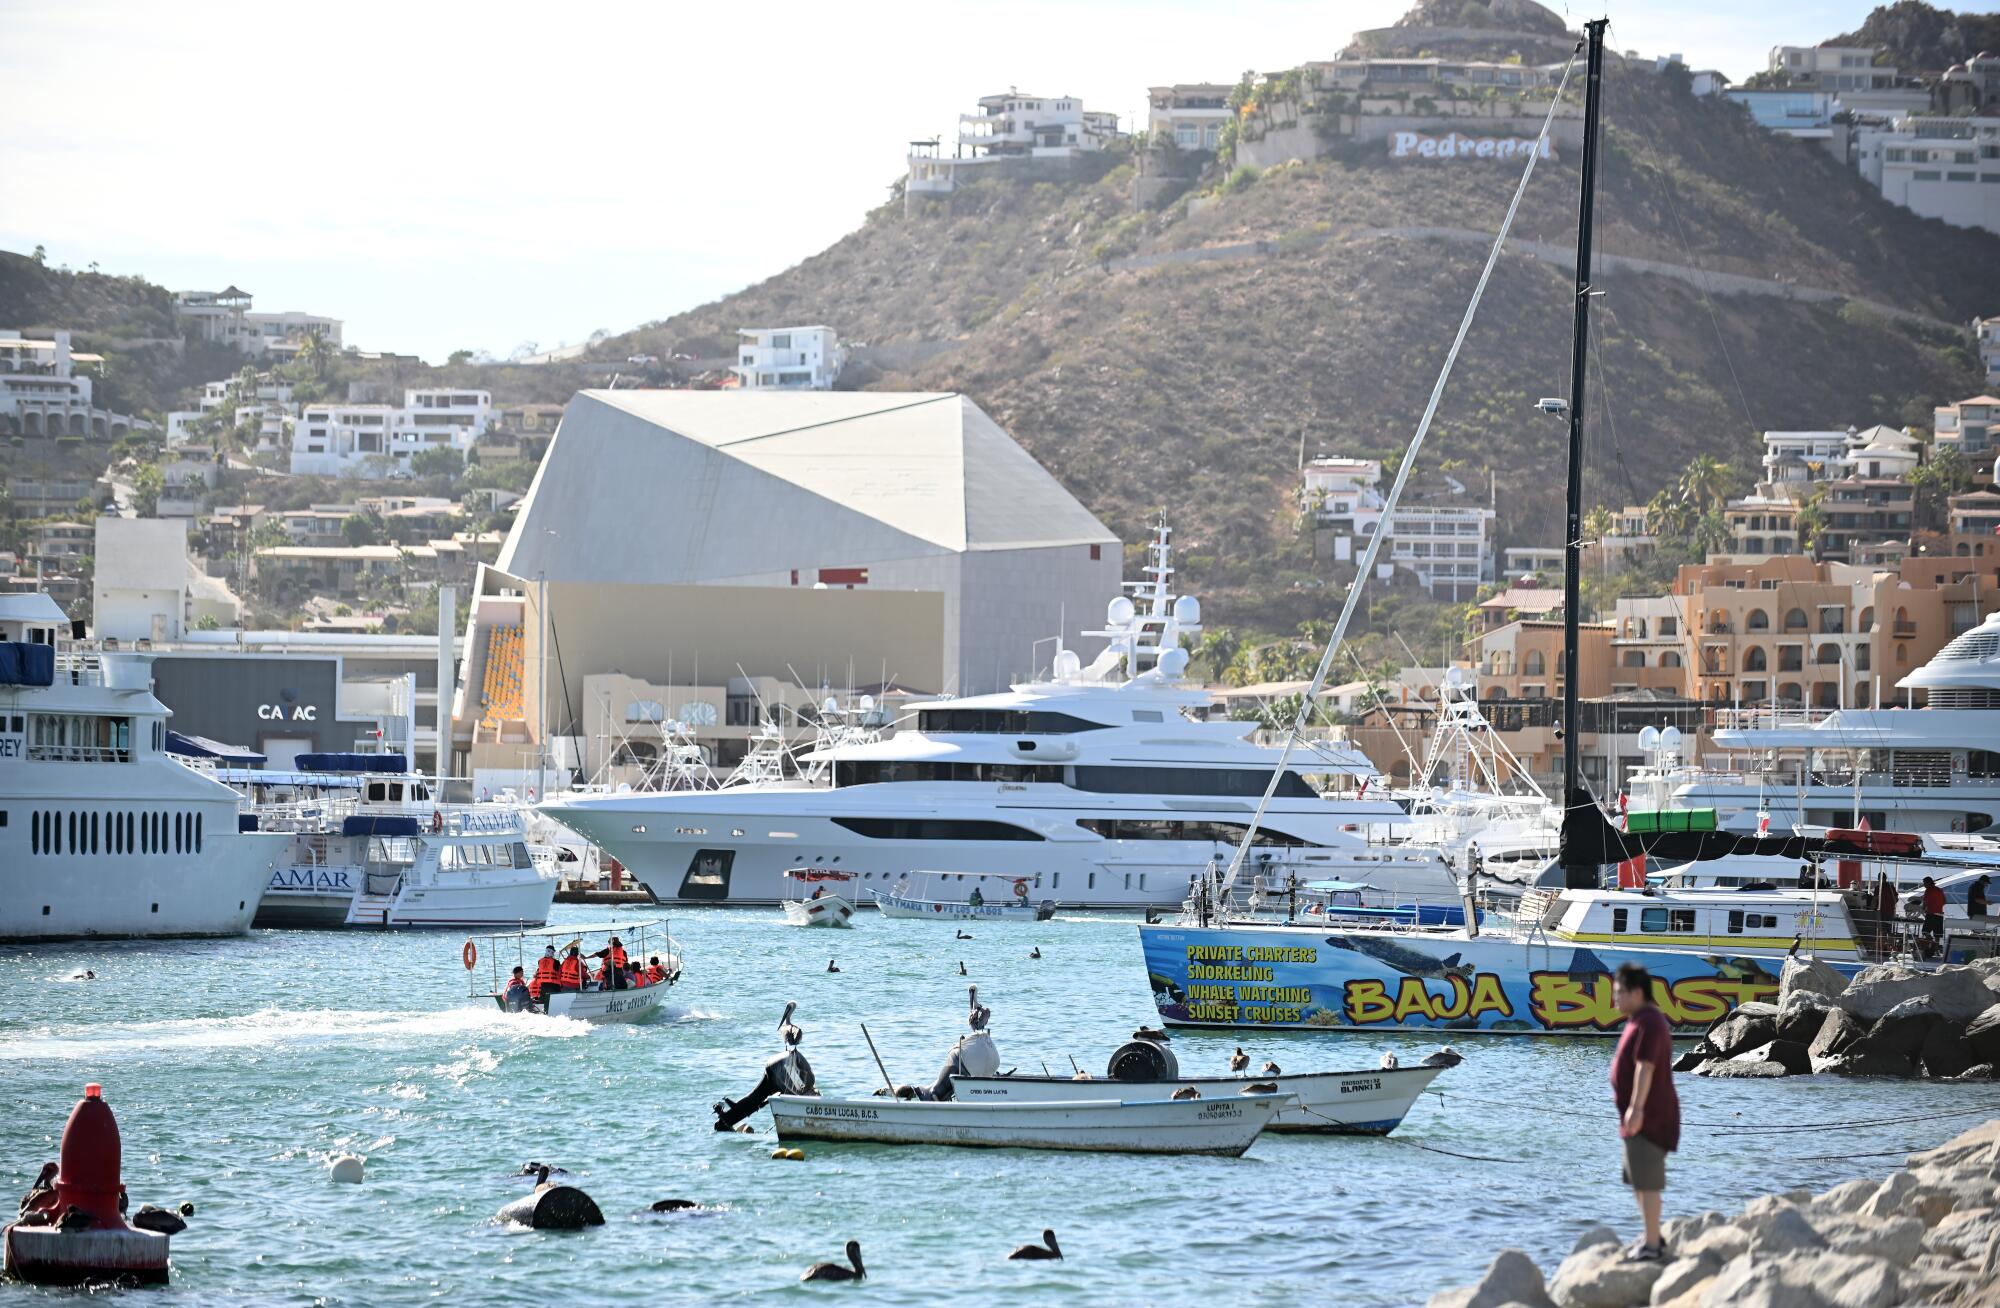 A harbor with yachts and buildings on hills in the background.